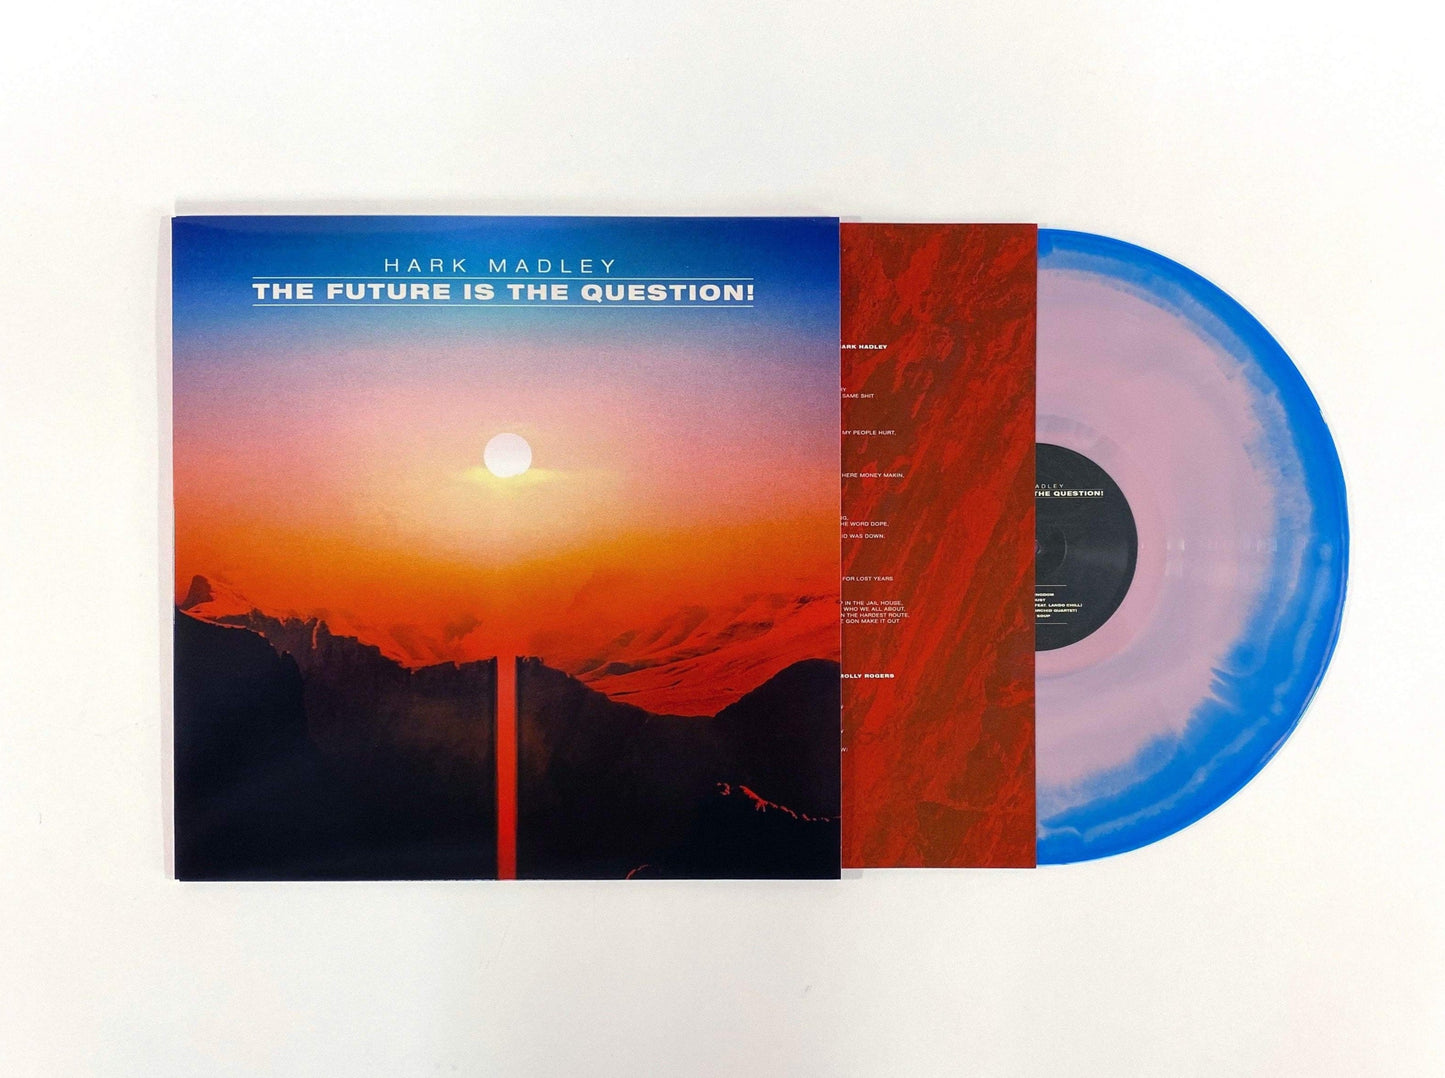 Load image into Gallery viewer, Hark Madley - The Future Is The Question! LP [VM Edition - Ltd. to 100] - VINYL MOON
